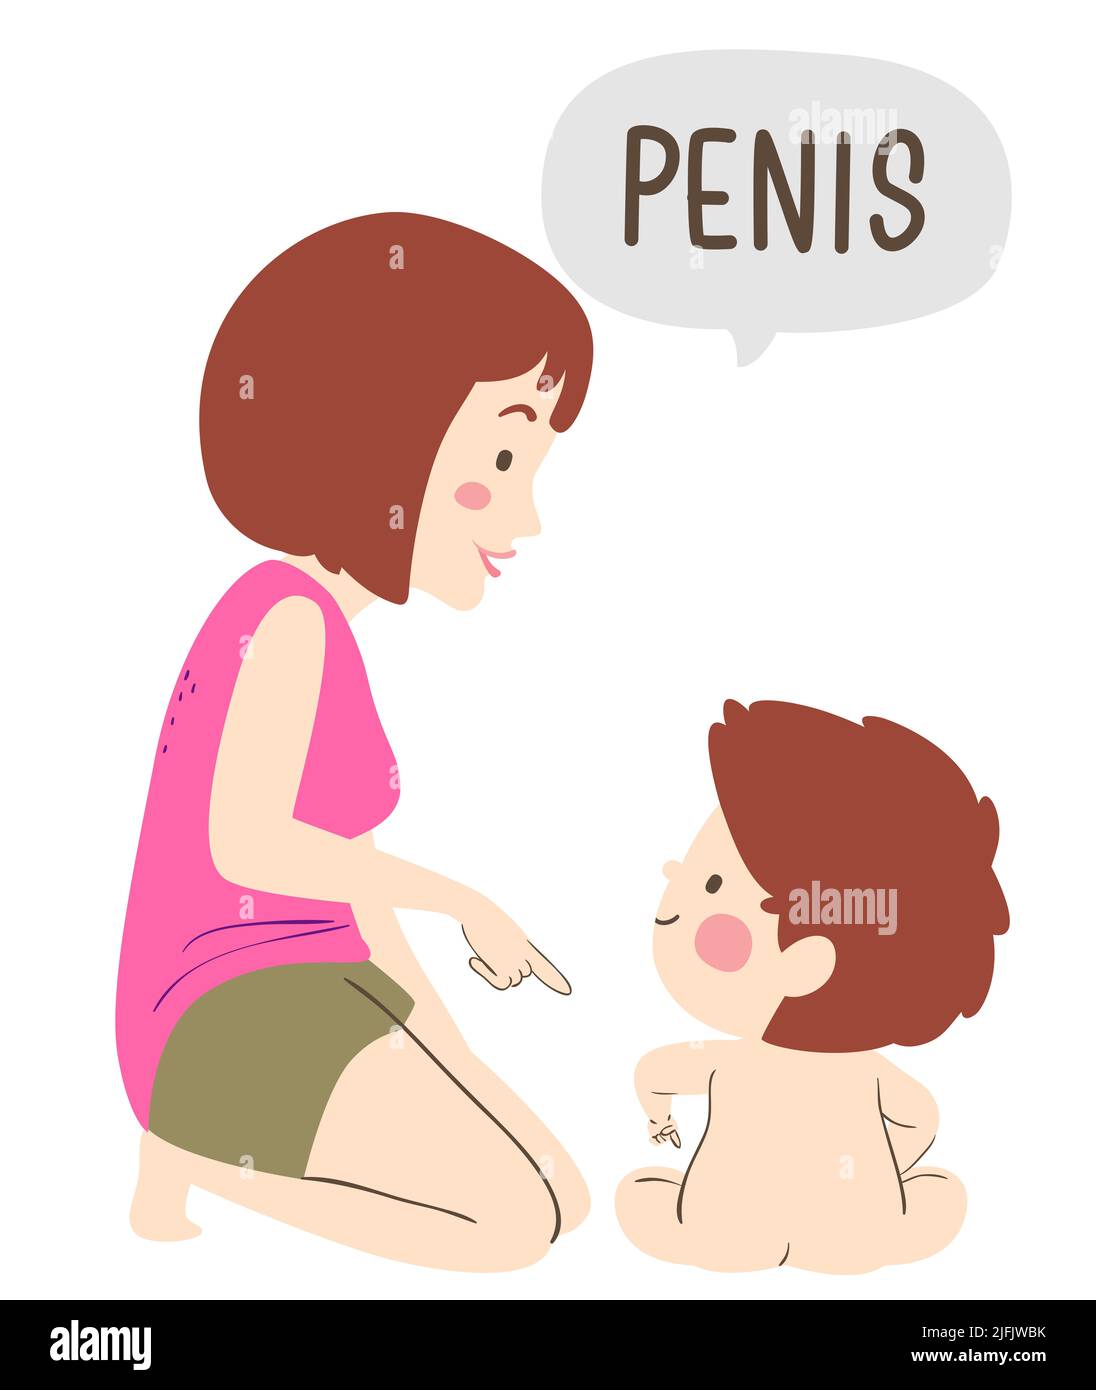 Illustration of Kid Boy Sitting Down Pointing to His Private Body Part, Mom Pointing and Saying Penis Stock Photo